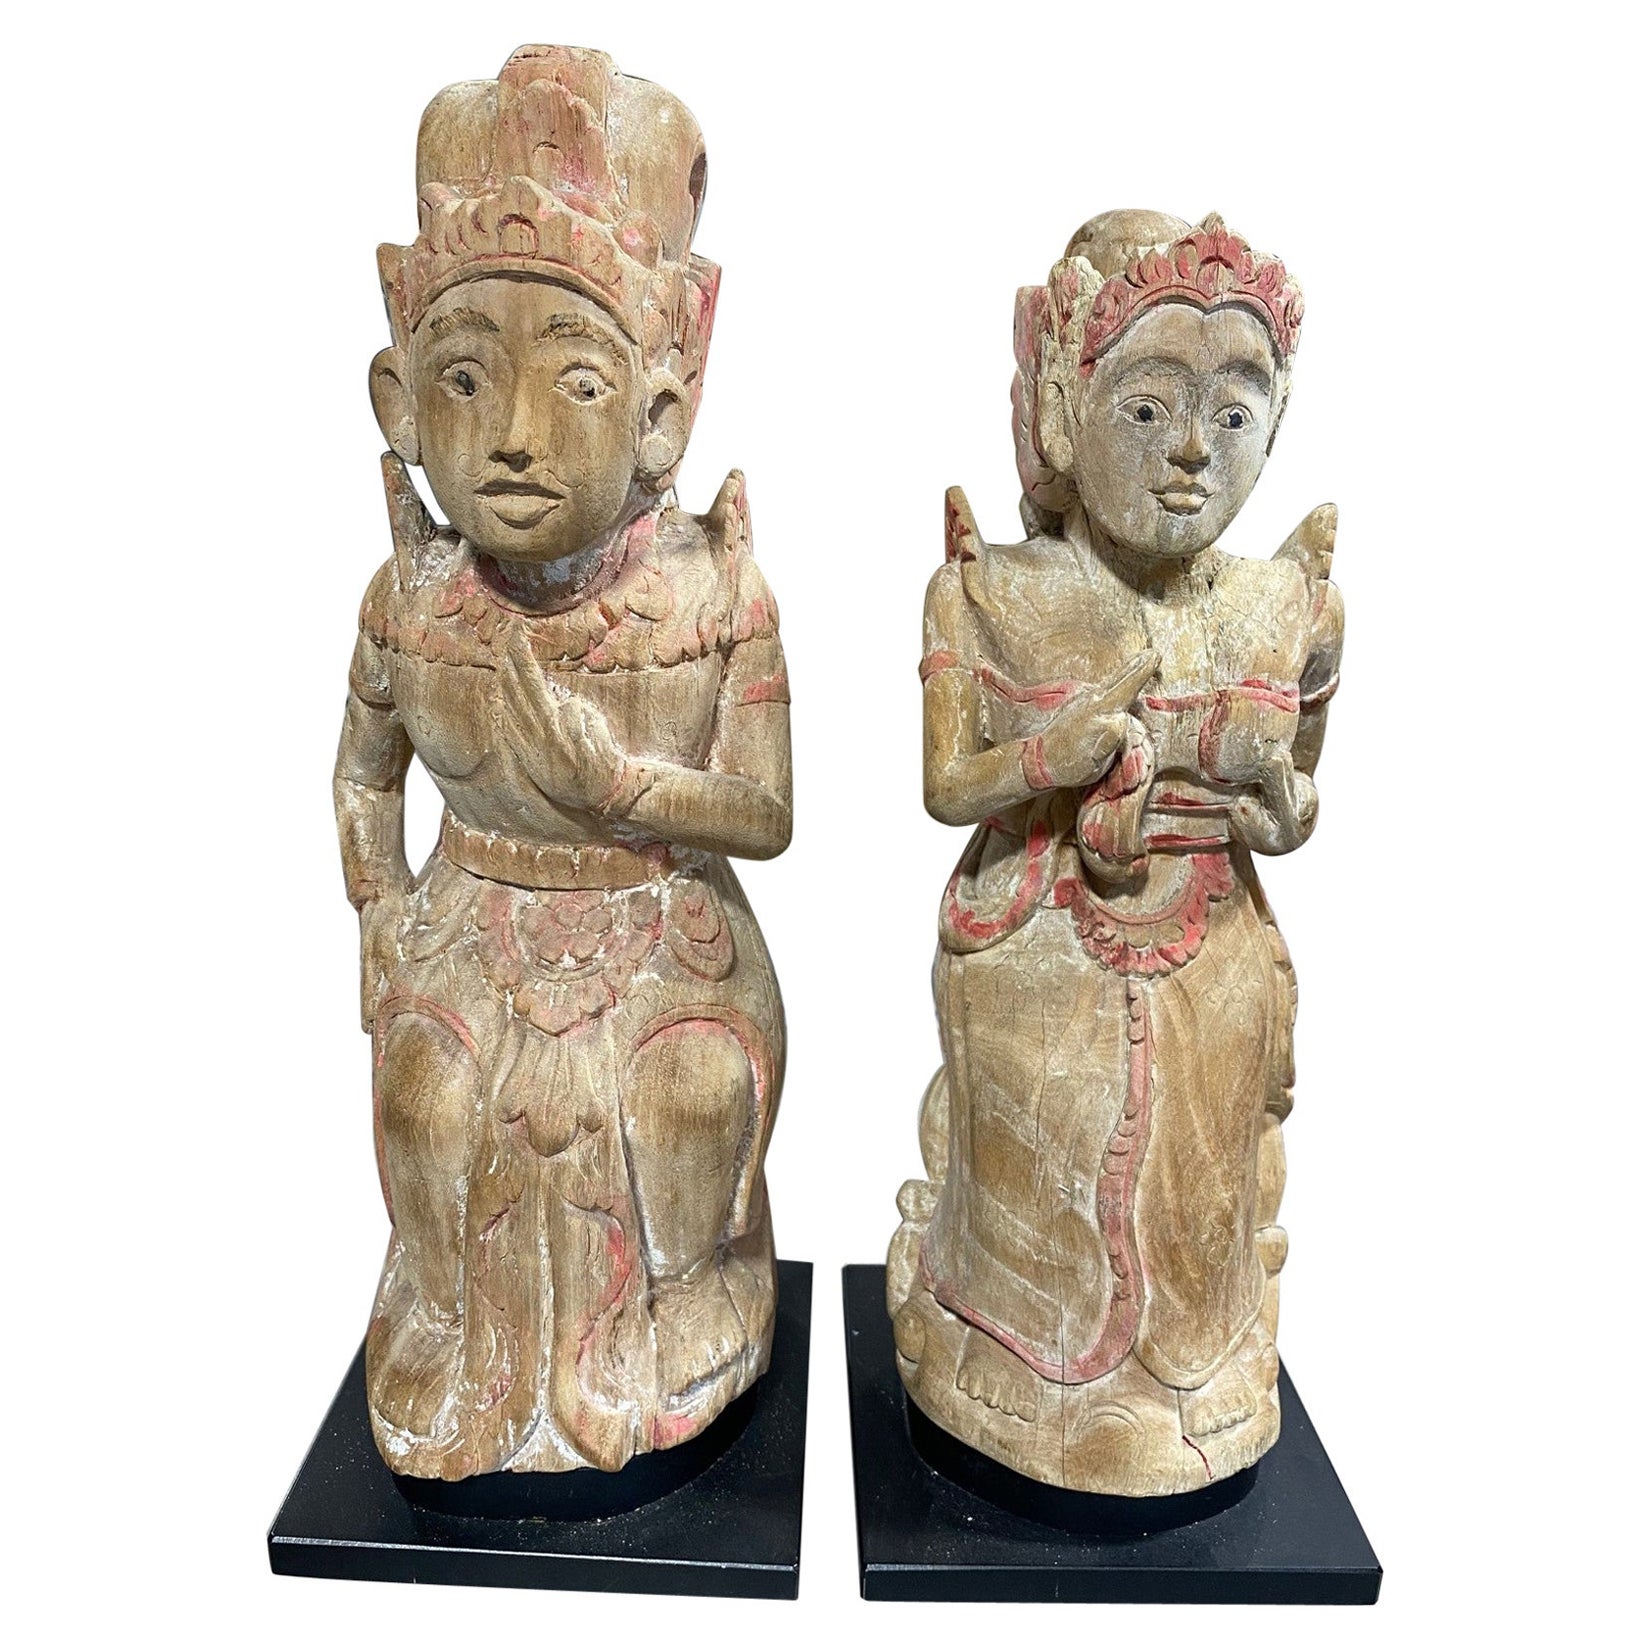 Pair of Indonesian Balinese Wood Carved Devotional Temple Shrine Sculptures 1950